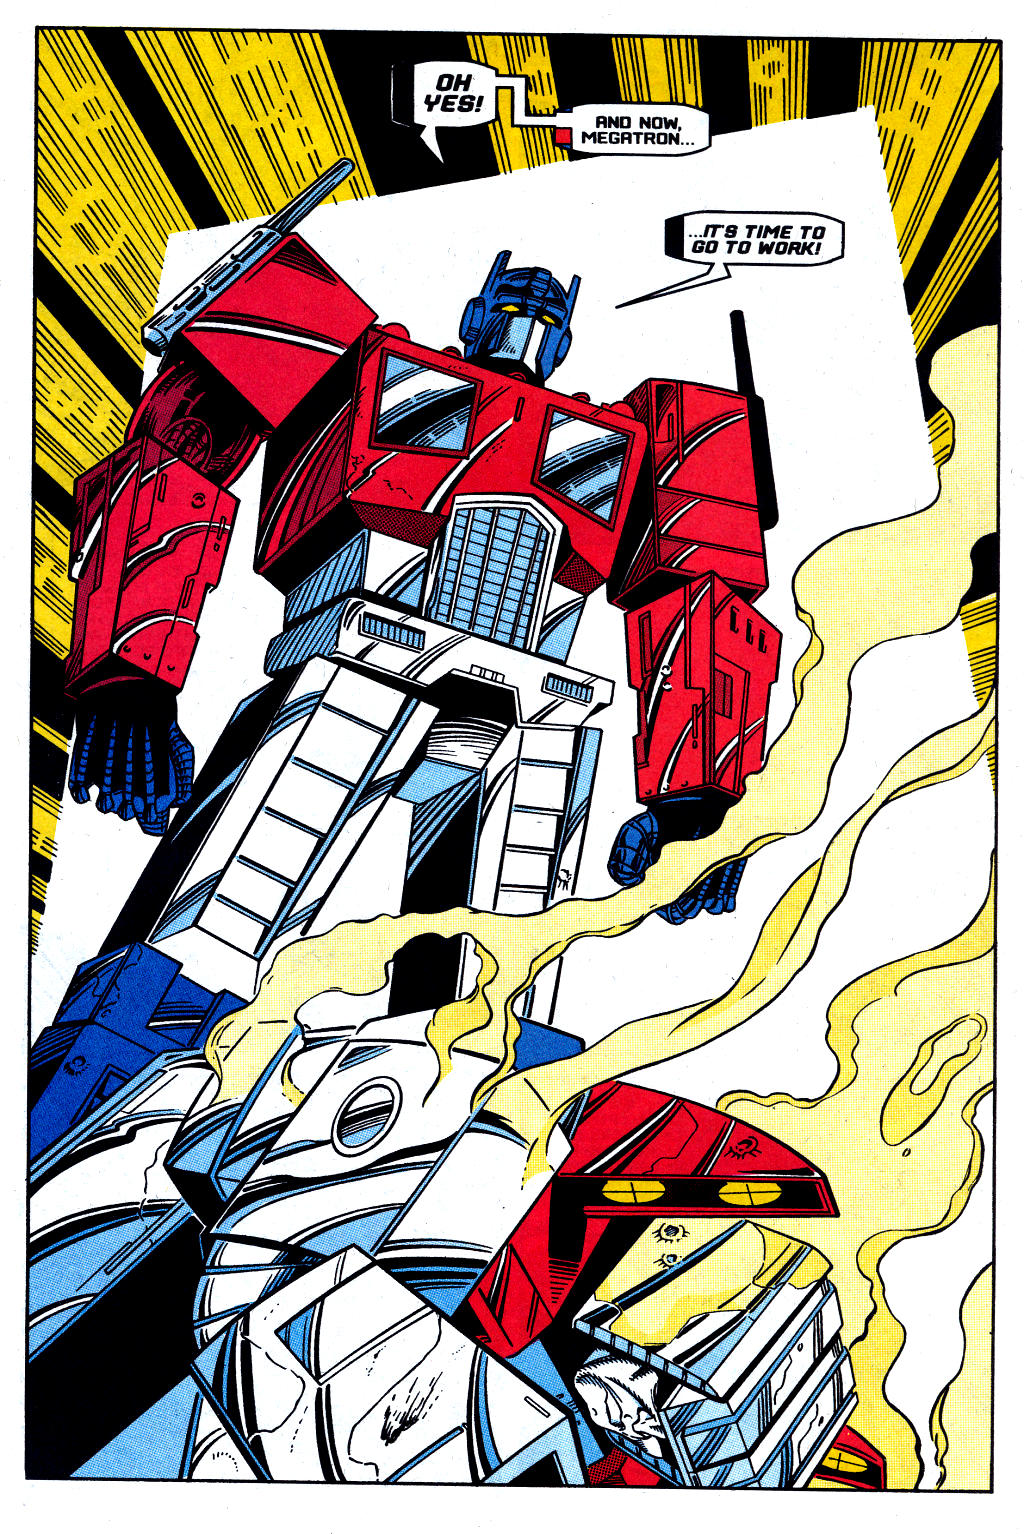 Transformers: Generation 2 Vol.1 Issue #12 "A Rage in Heaven! Book One: Judgment" (1994), Marvel Comics. Words by Simon Furman. Art by Manny Galan, Geoff Senior, Jim Amash, and Sarra Mossoff